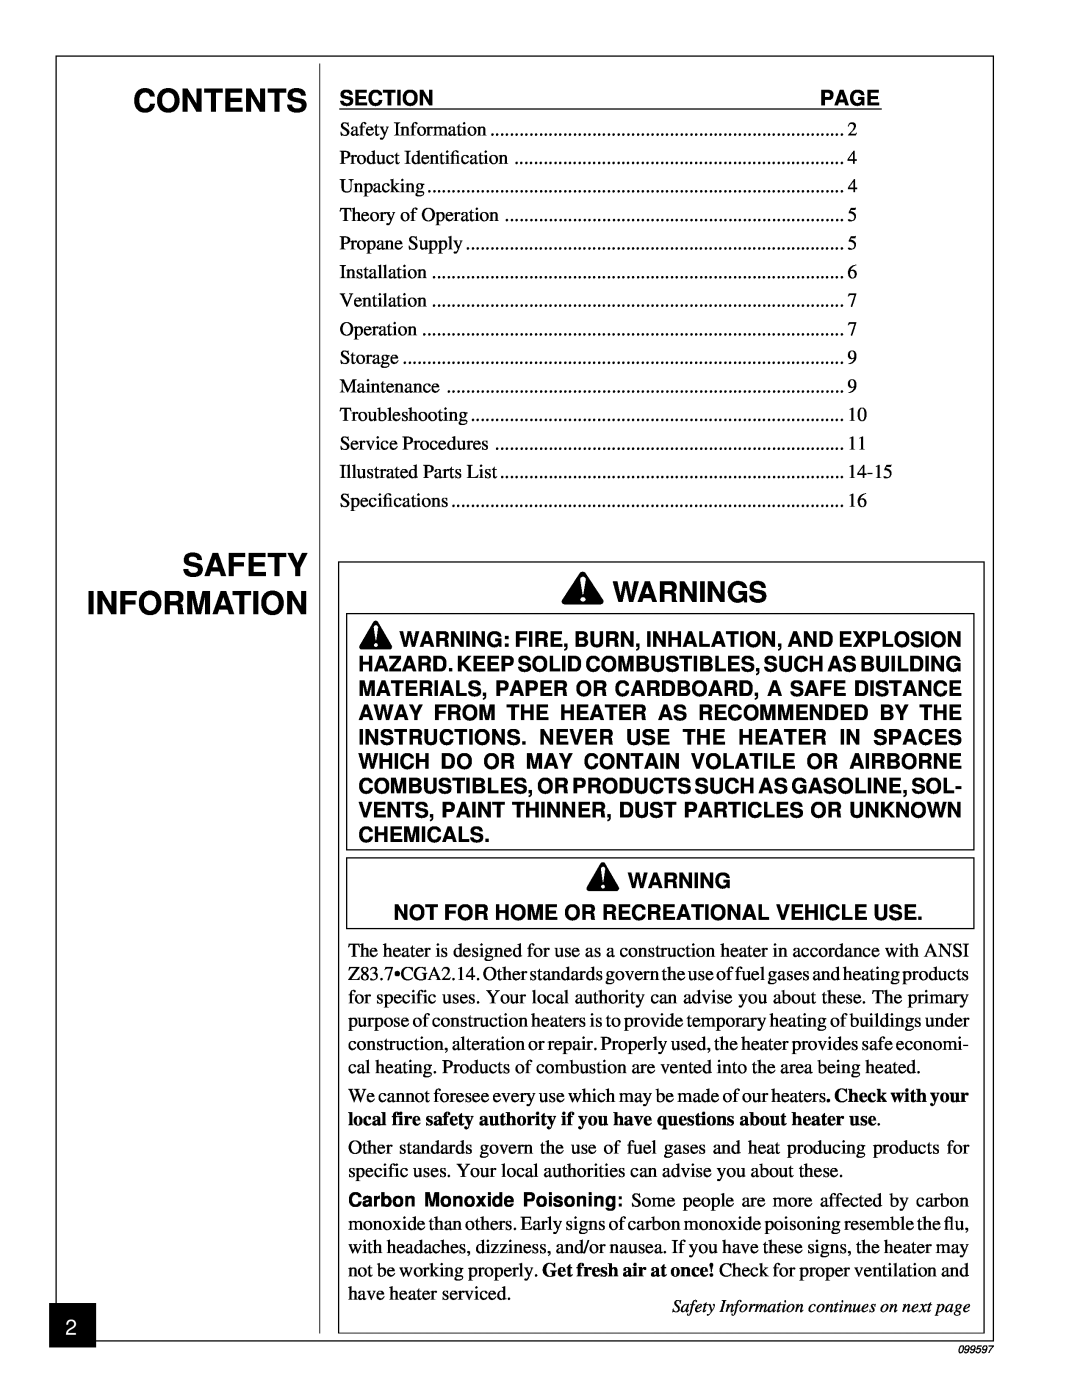 Homelite HP35 owner manual Contents Safety Information, G 001WARNINGS 